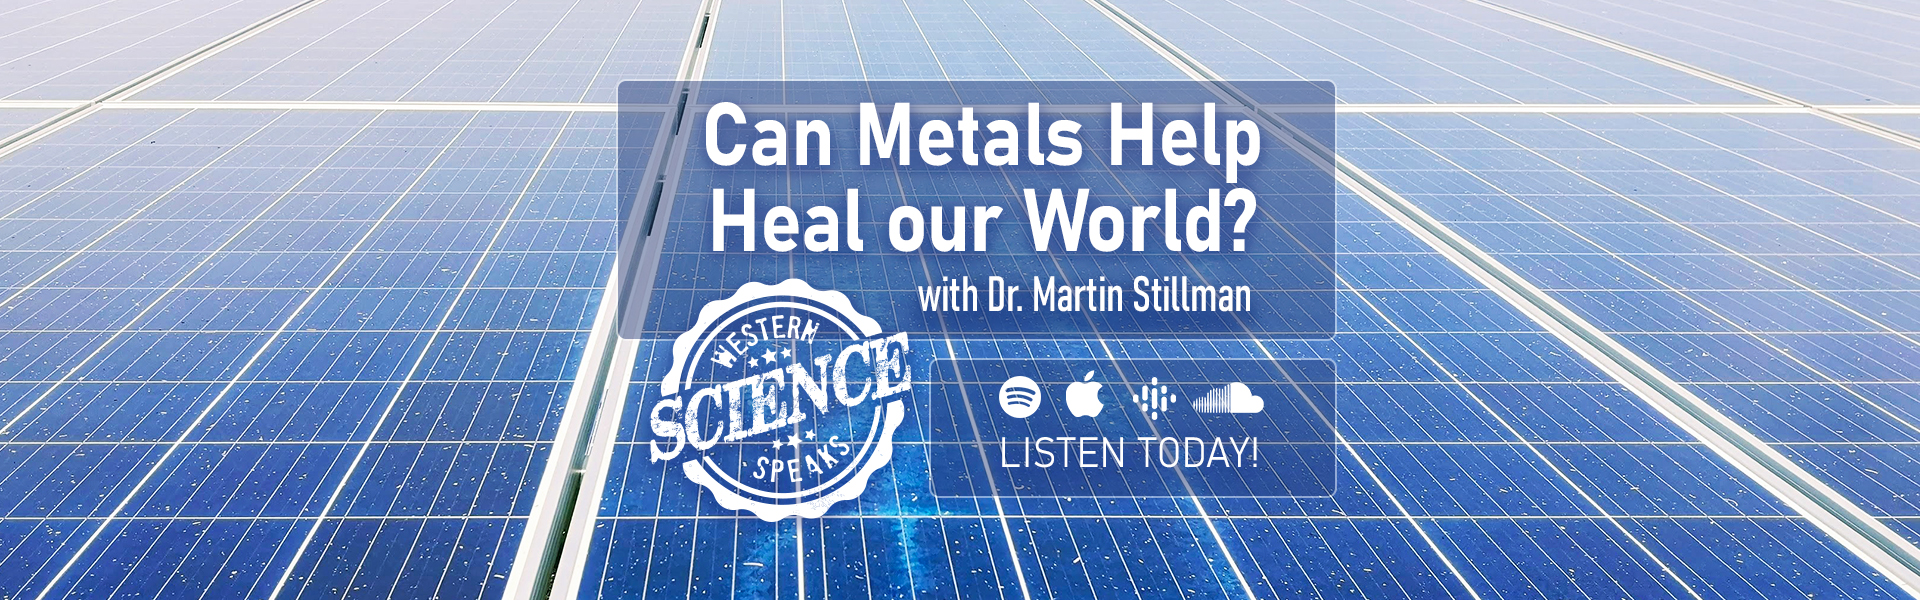 Can Metals Help Heal our World? Podcast Episode